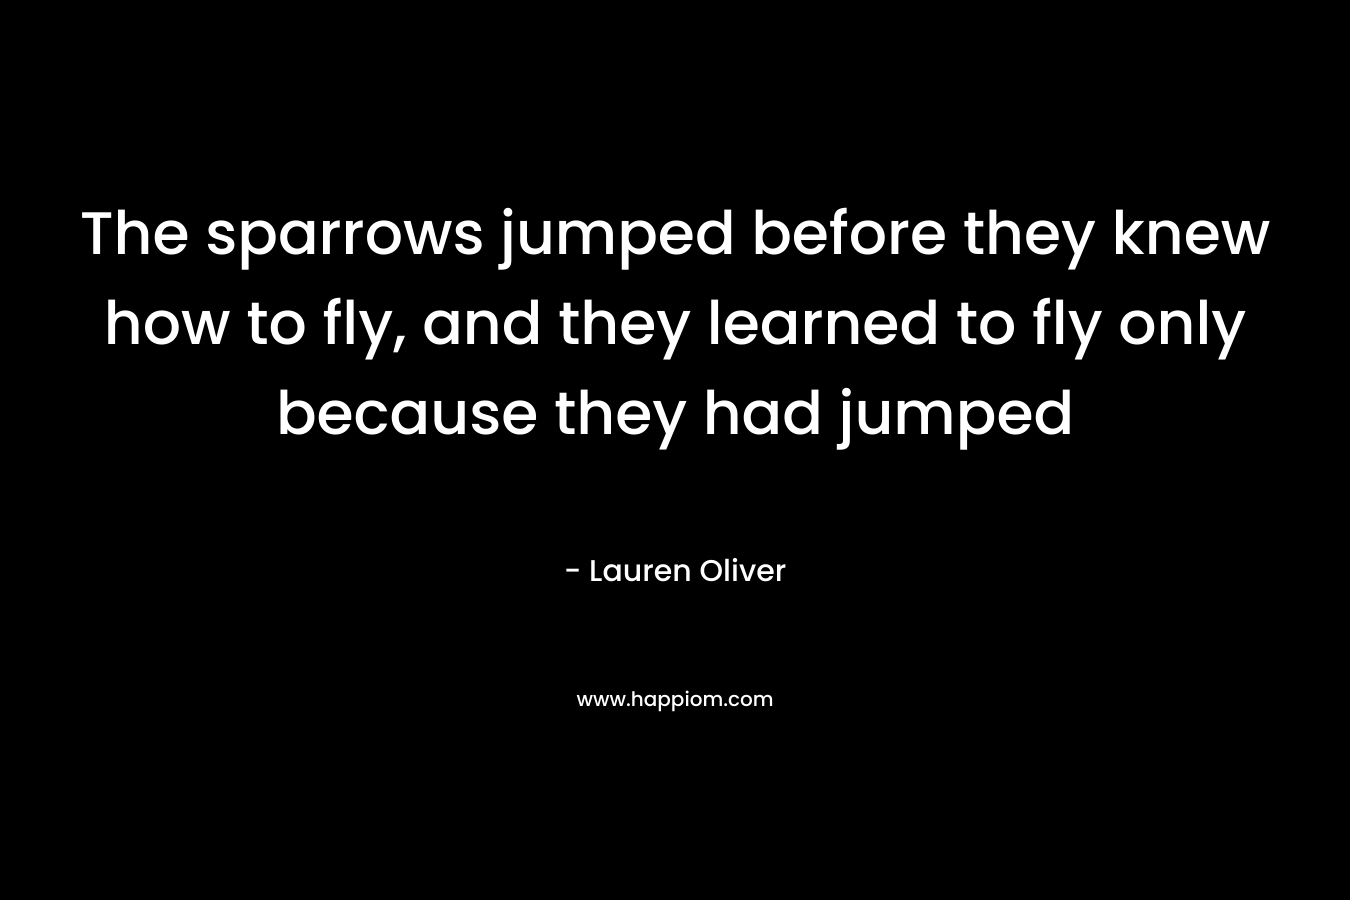 The sparrows jumped before they knew how to fly, and they learned to fly only because they had jumped – Lauren Oliver